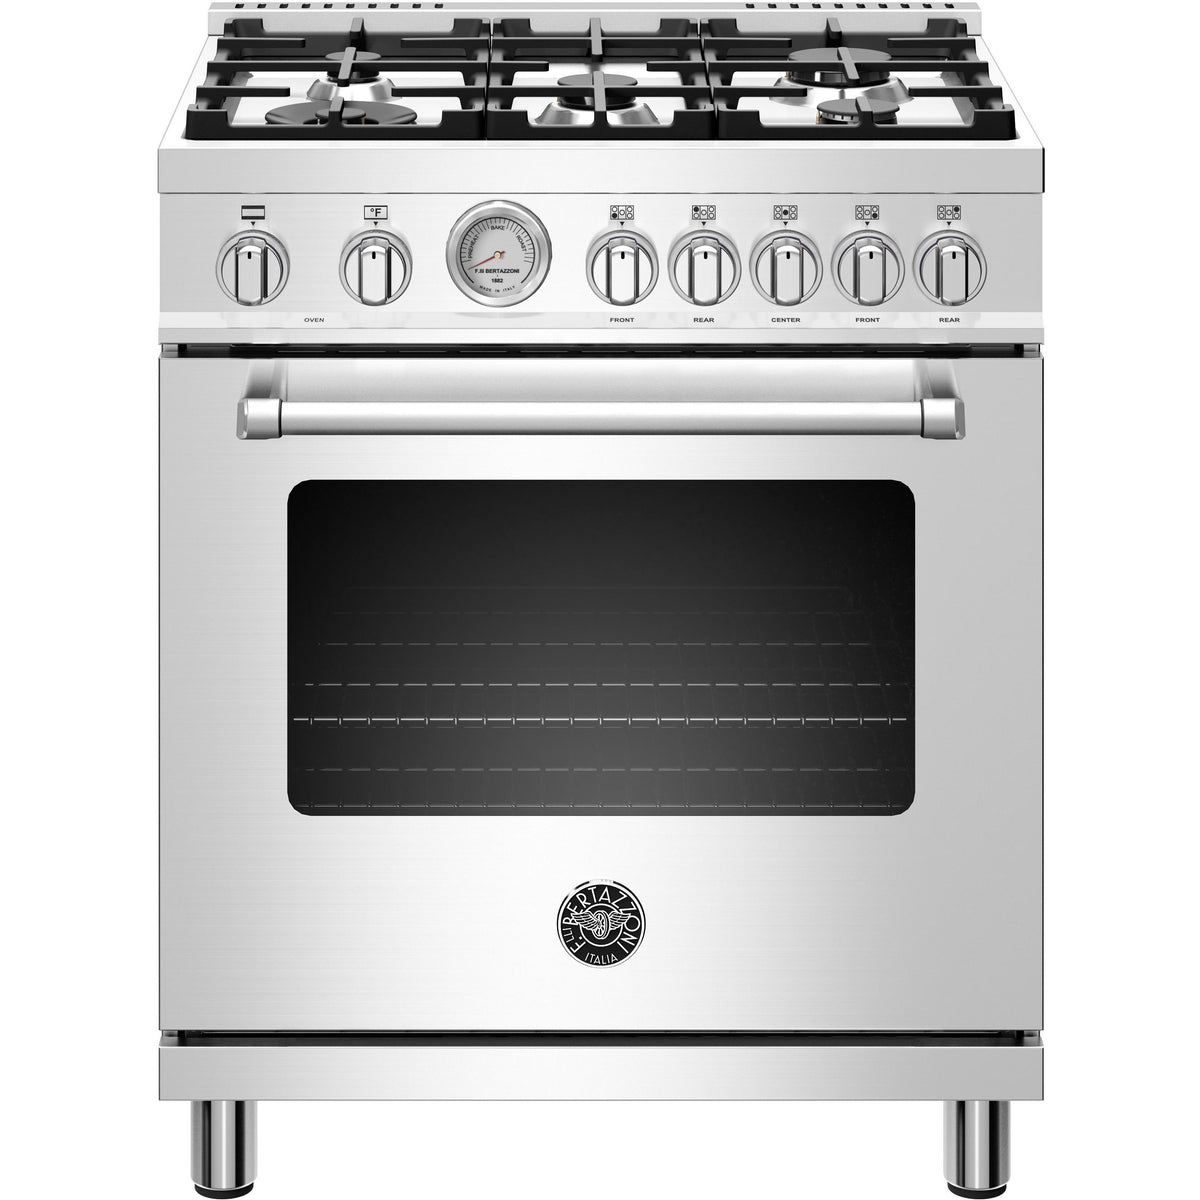 30-inch Freestanding Dual-Fuel Range with Convection Technology MAST305DFMXE IMAGE 1